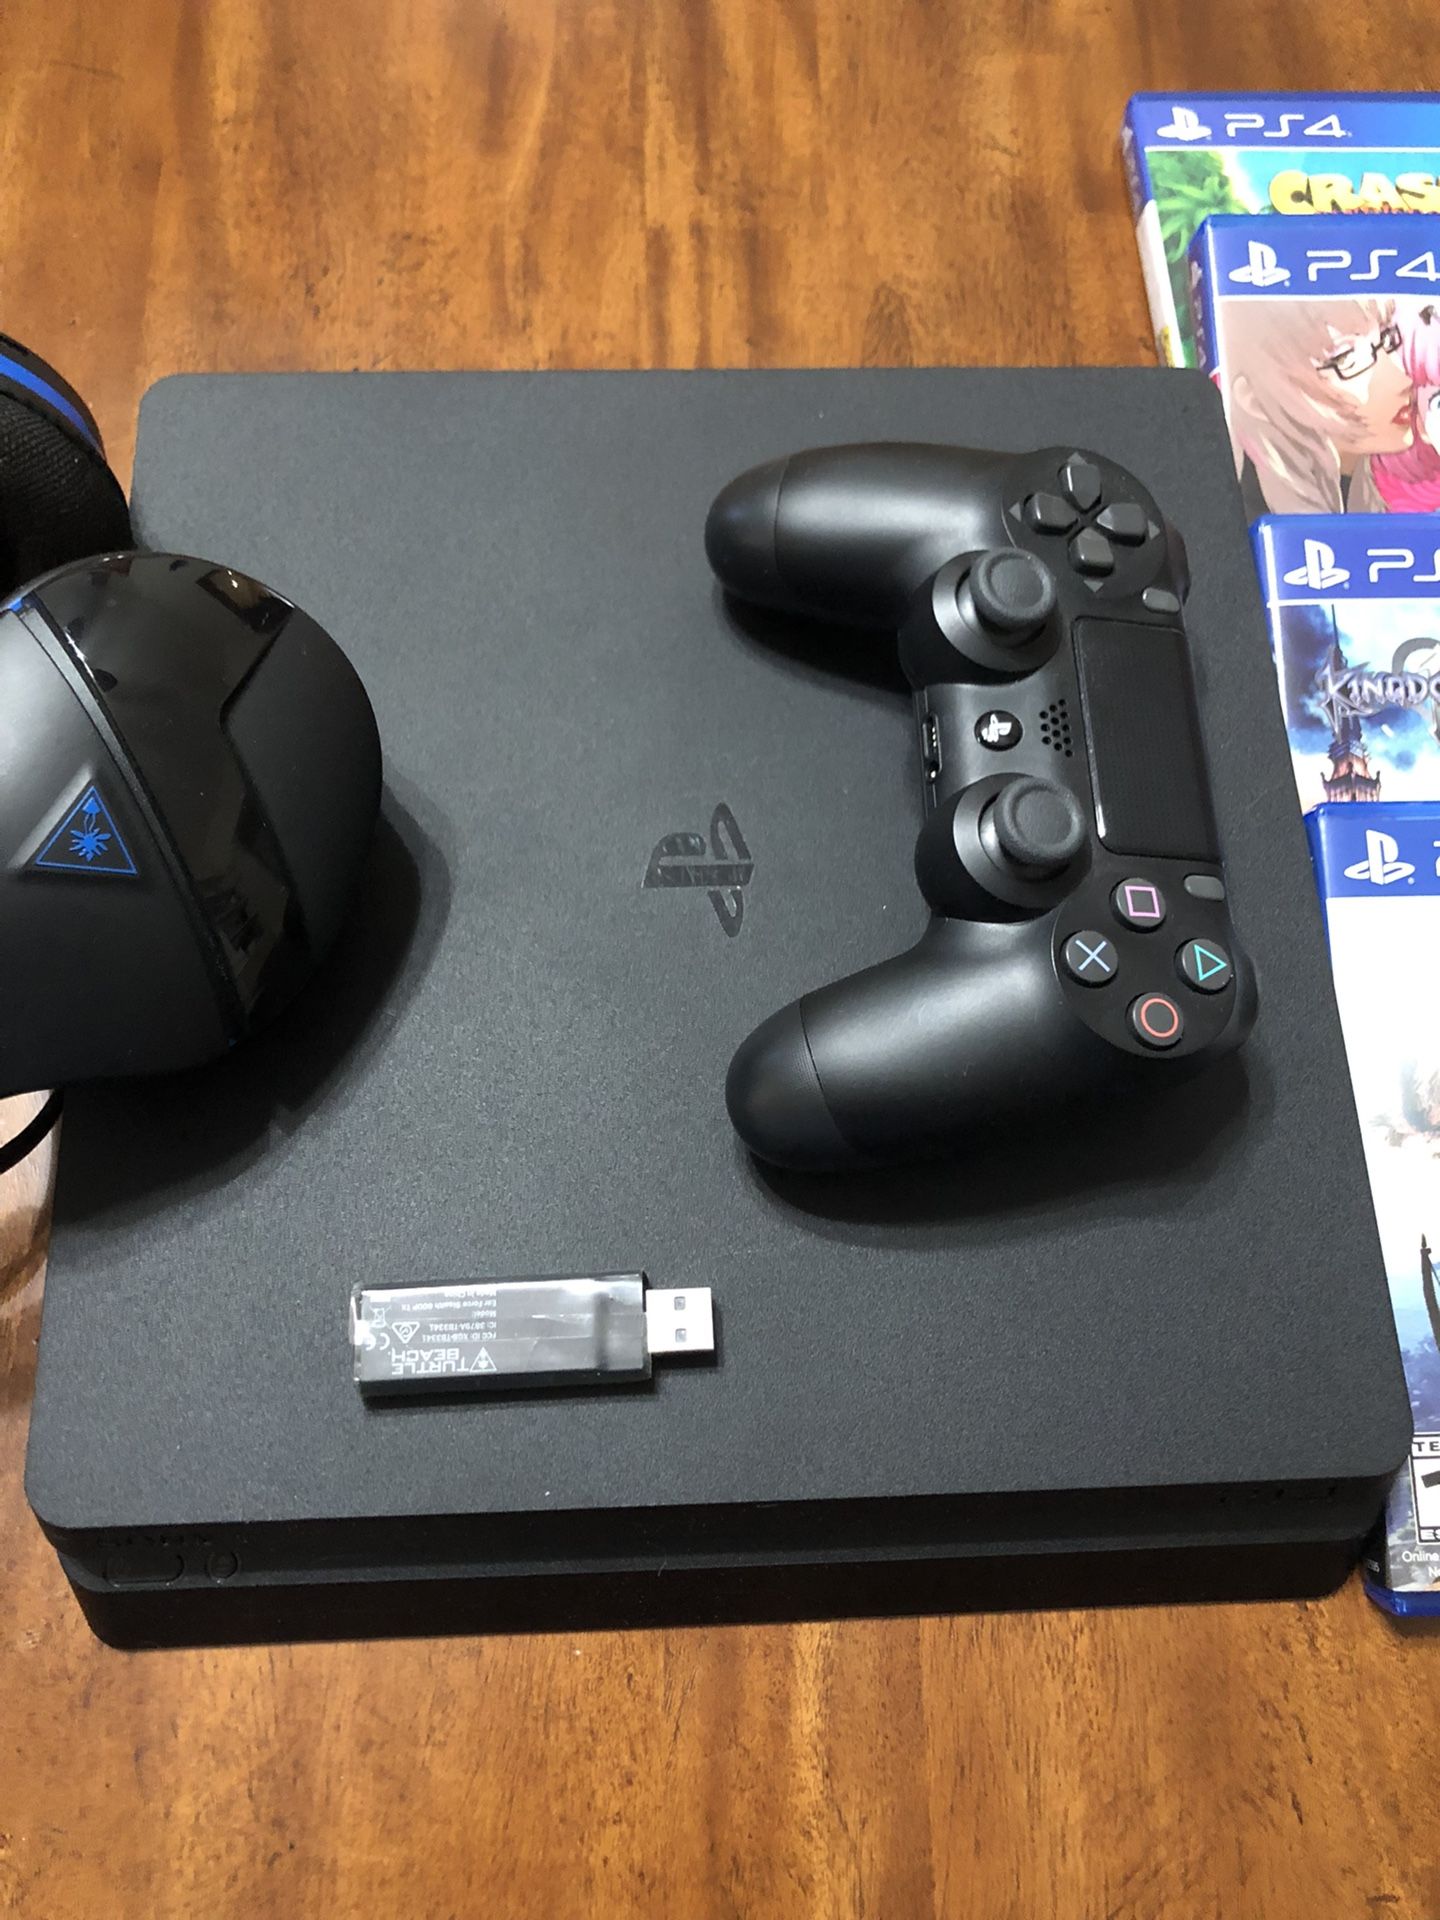 PS4 Game Console Includes Wireless Headset, 1 Remote Control, 8 Games And A USB 